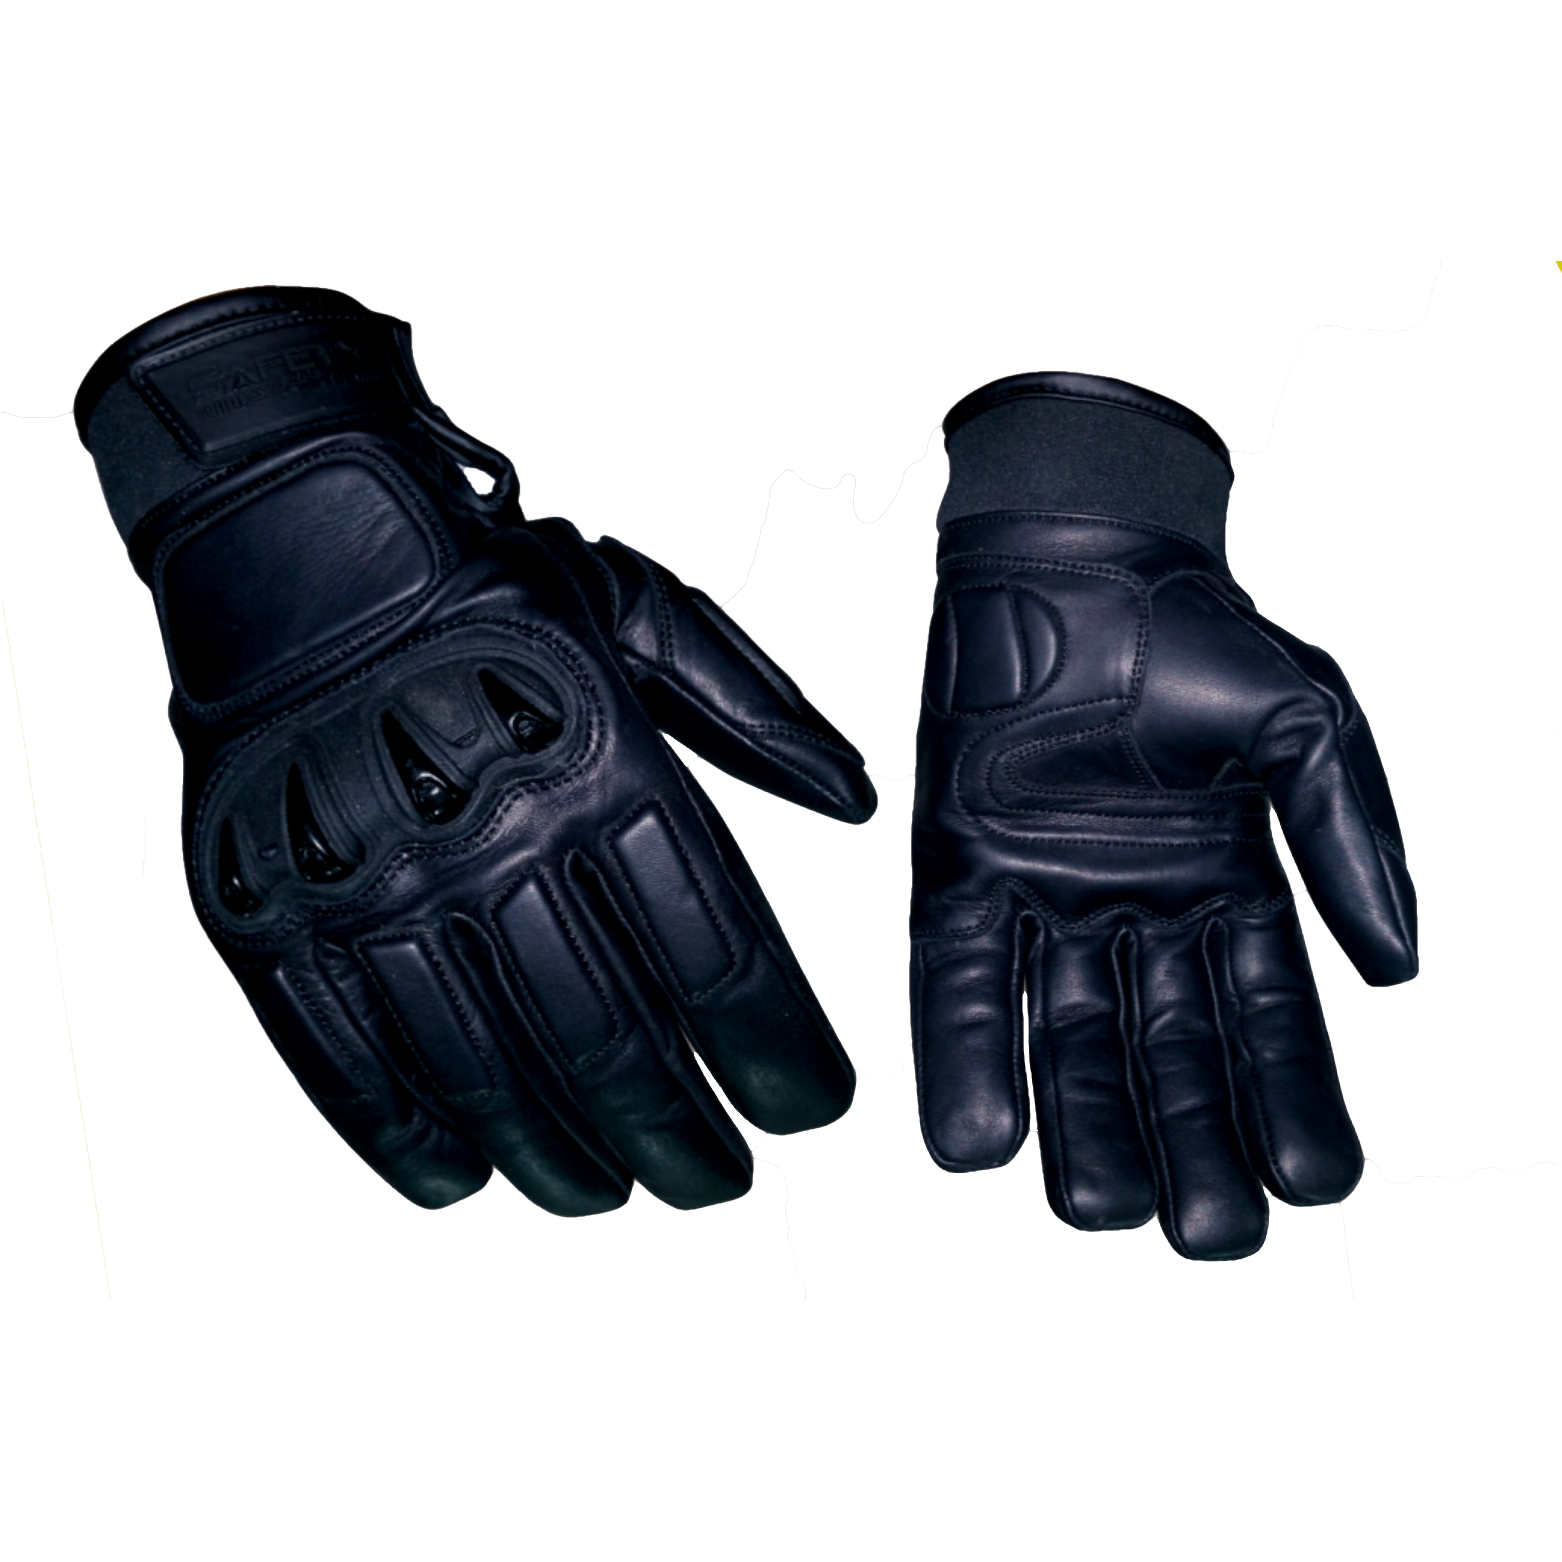 CEST Protect & Knife cut protection glove